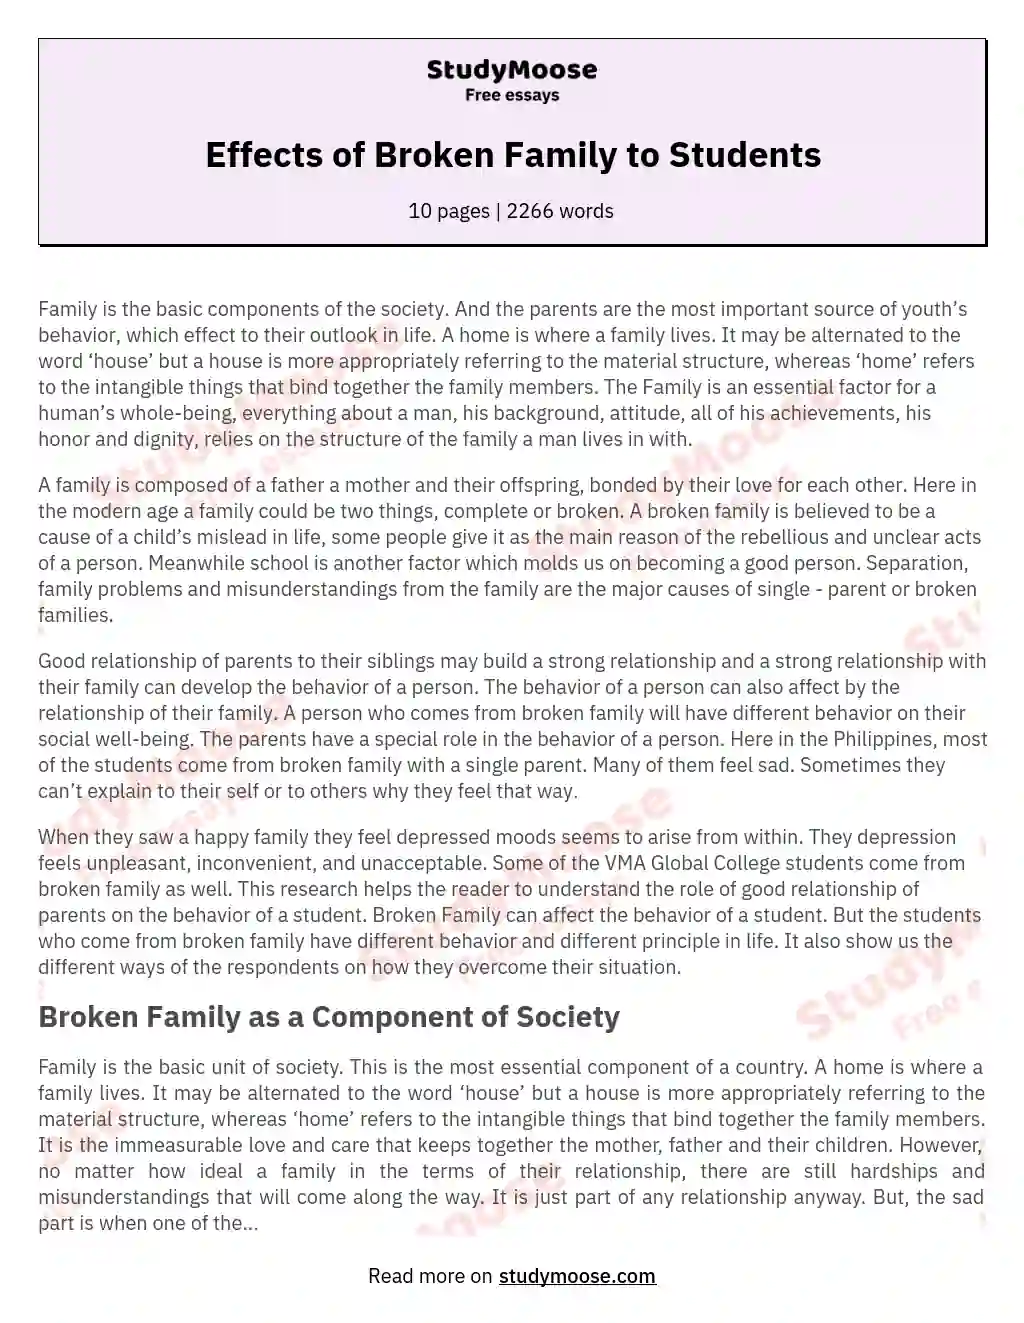 Effects of Broken Family to Students essay